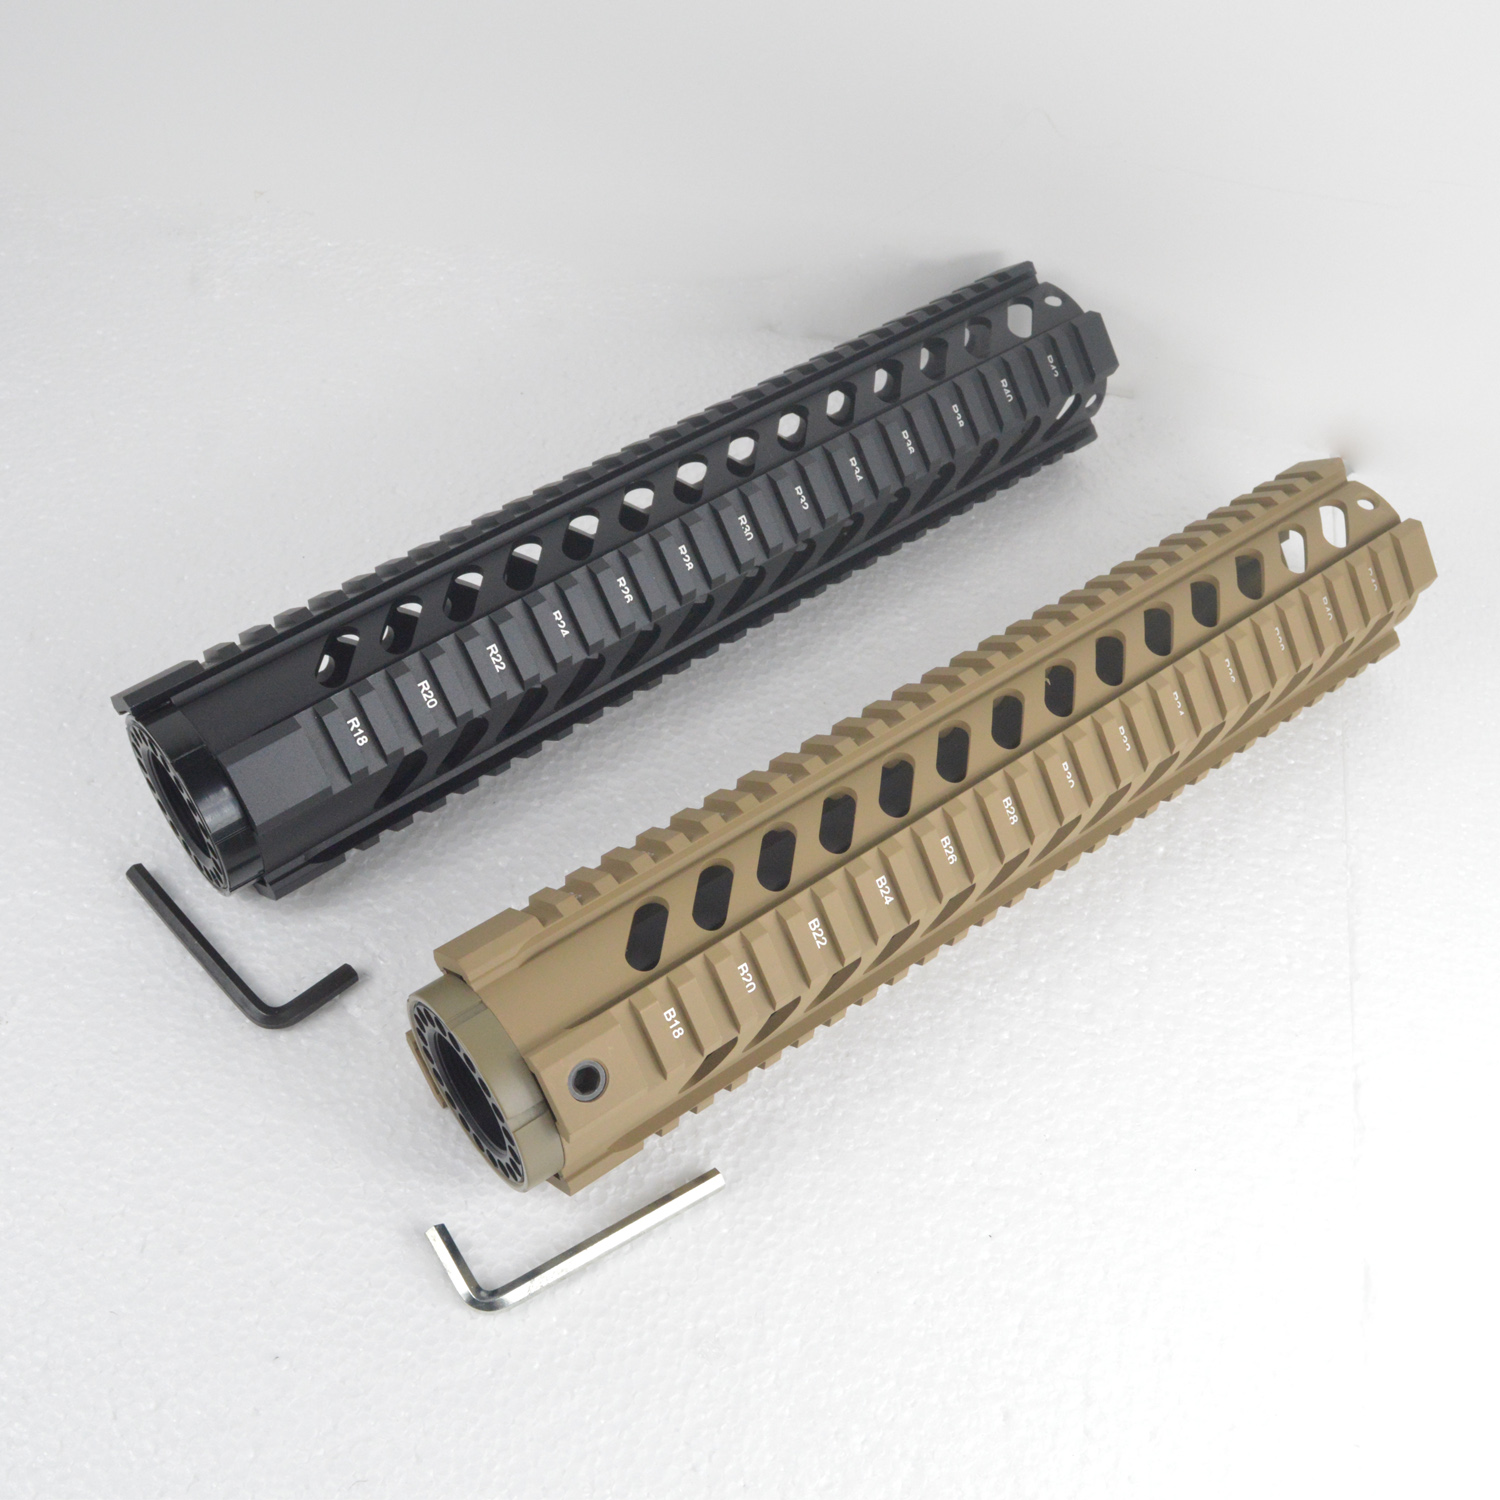 

12 Inch Free Float Quad Rail Handguard Picatinny Rail System Forend Fits.223/5.56 Types Black or Tan Color